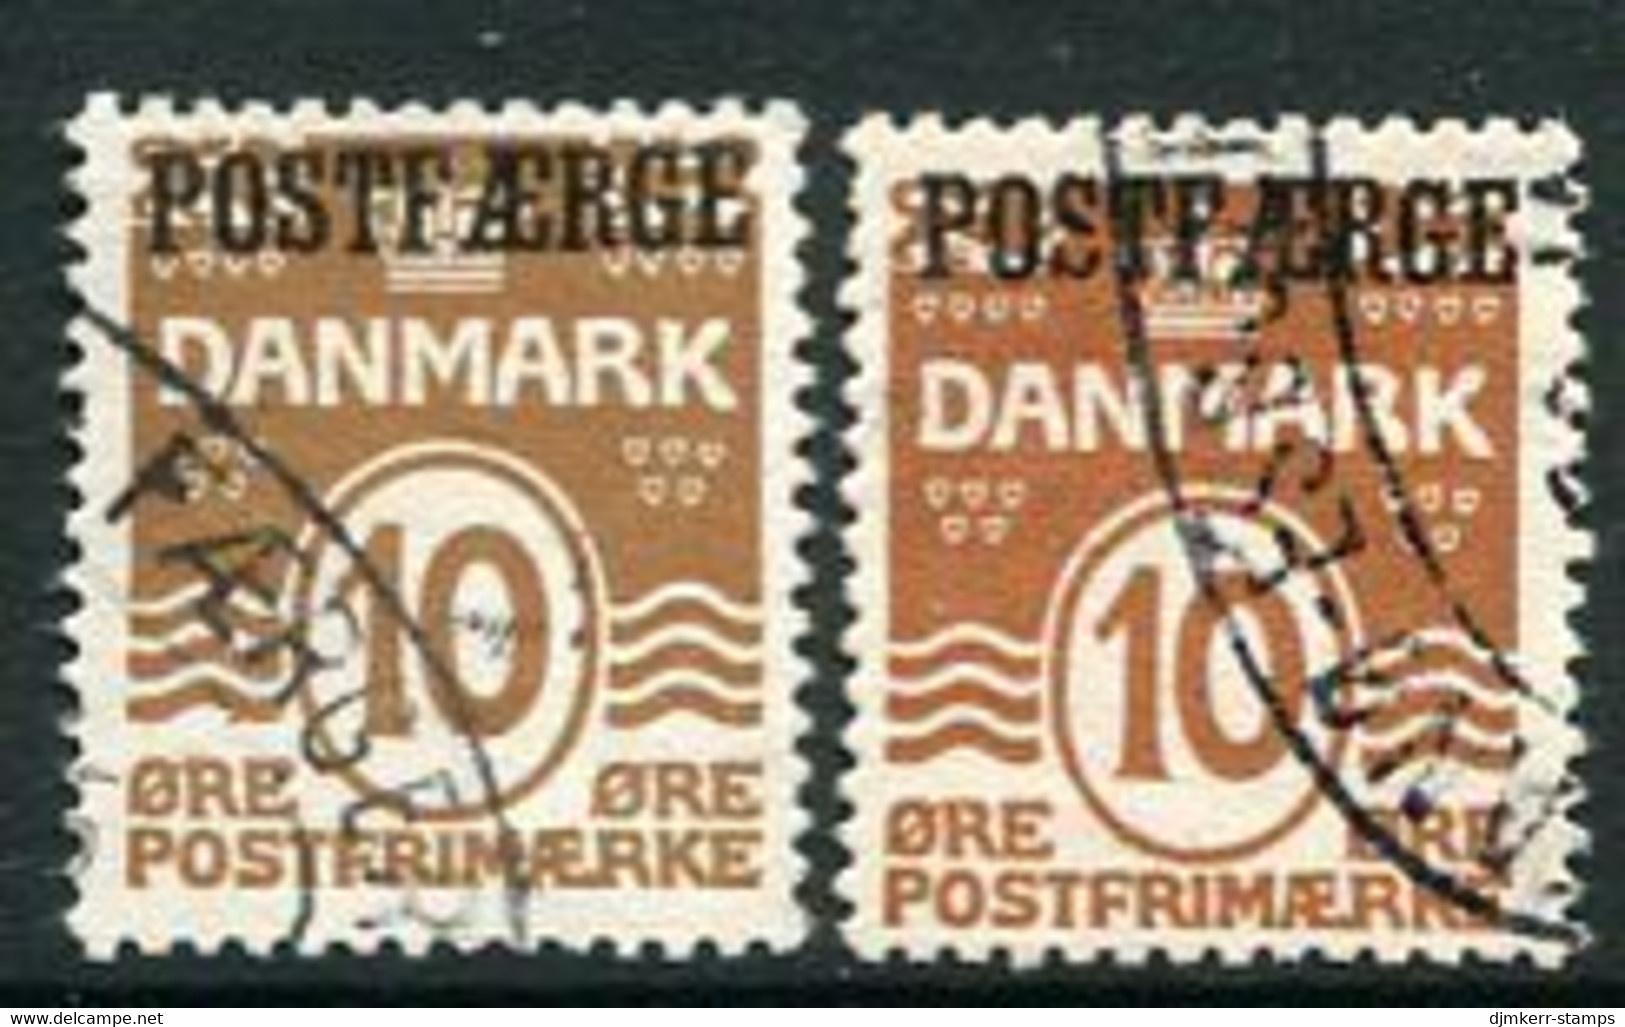 DENMARK 1930-32 Postal Ferry 10 Øre Yellow-brown And Red-brown, Used - Parcel Post